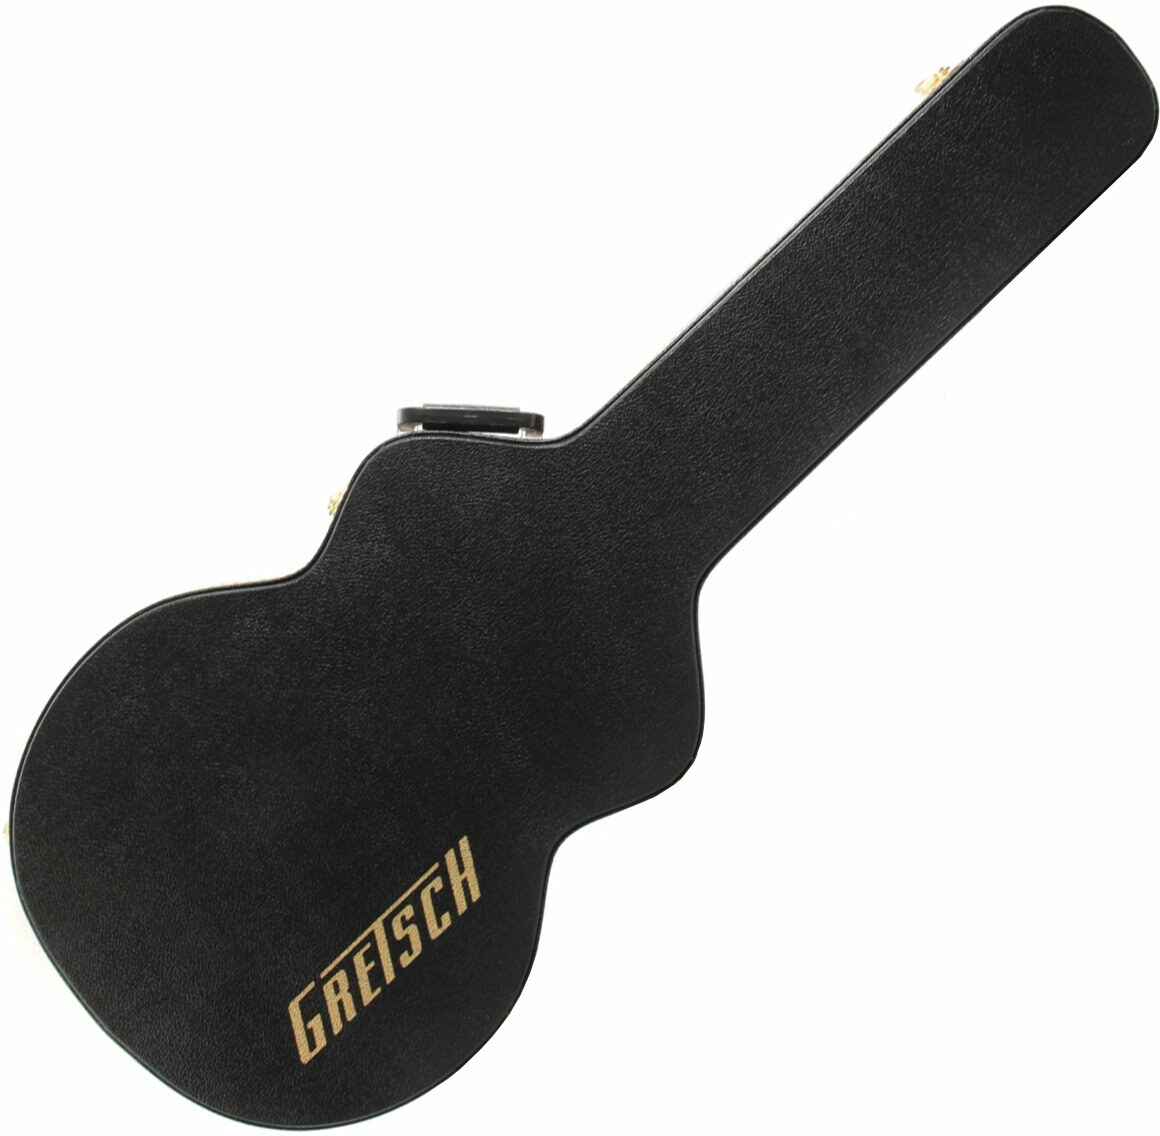 Gretsch G6298 16inch Electromatic Hollow Body 12-string Guitar Case - Electric guitar case - Main picture